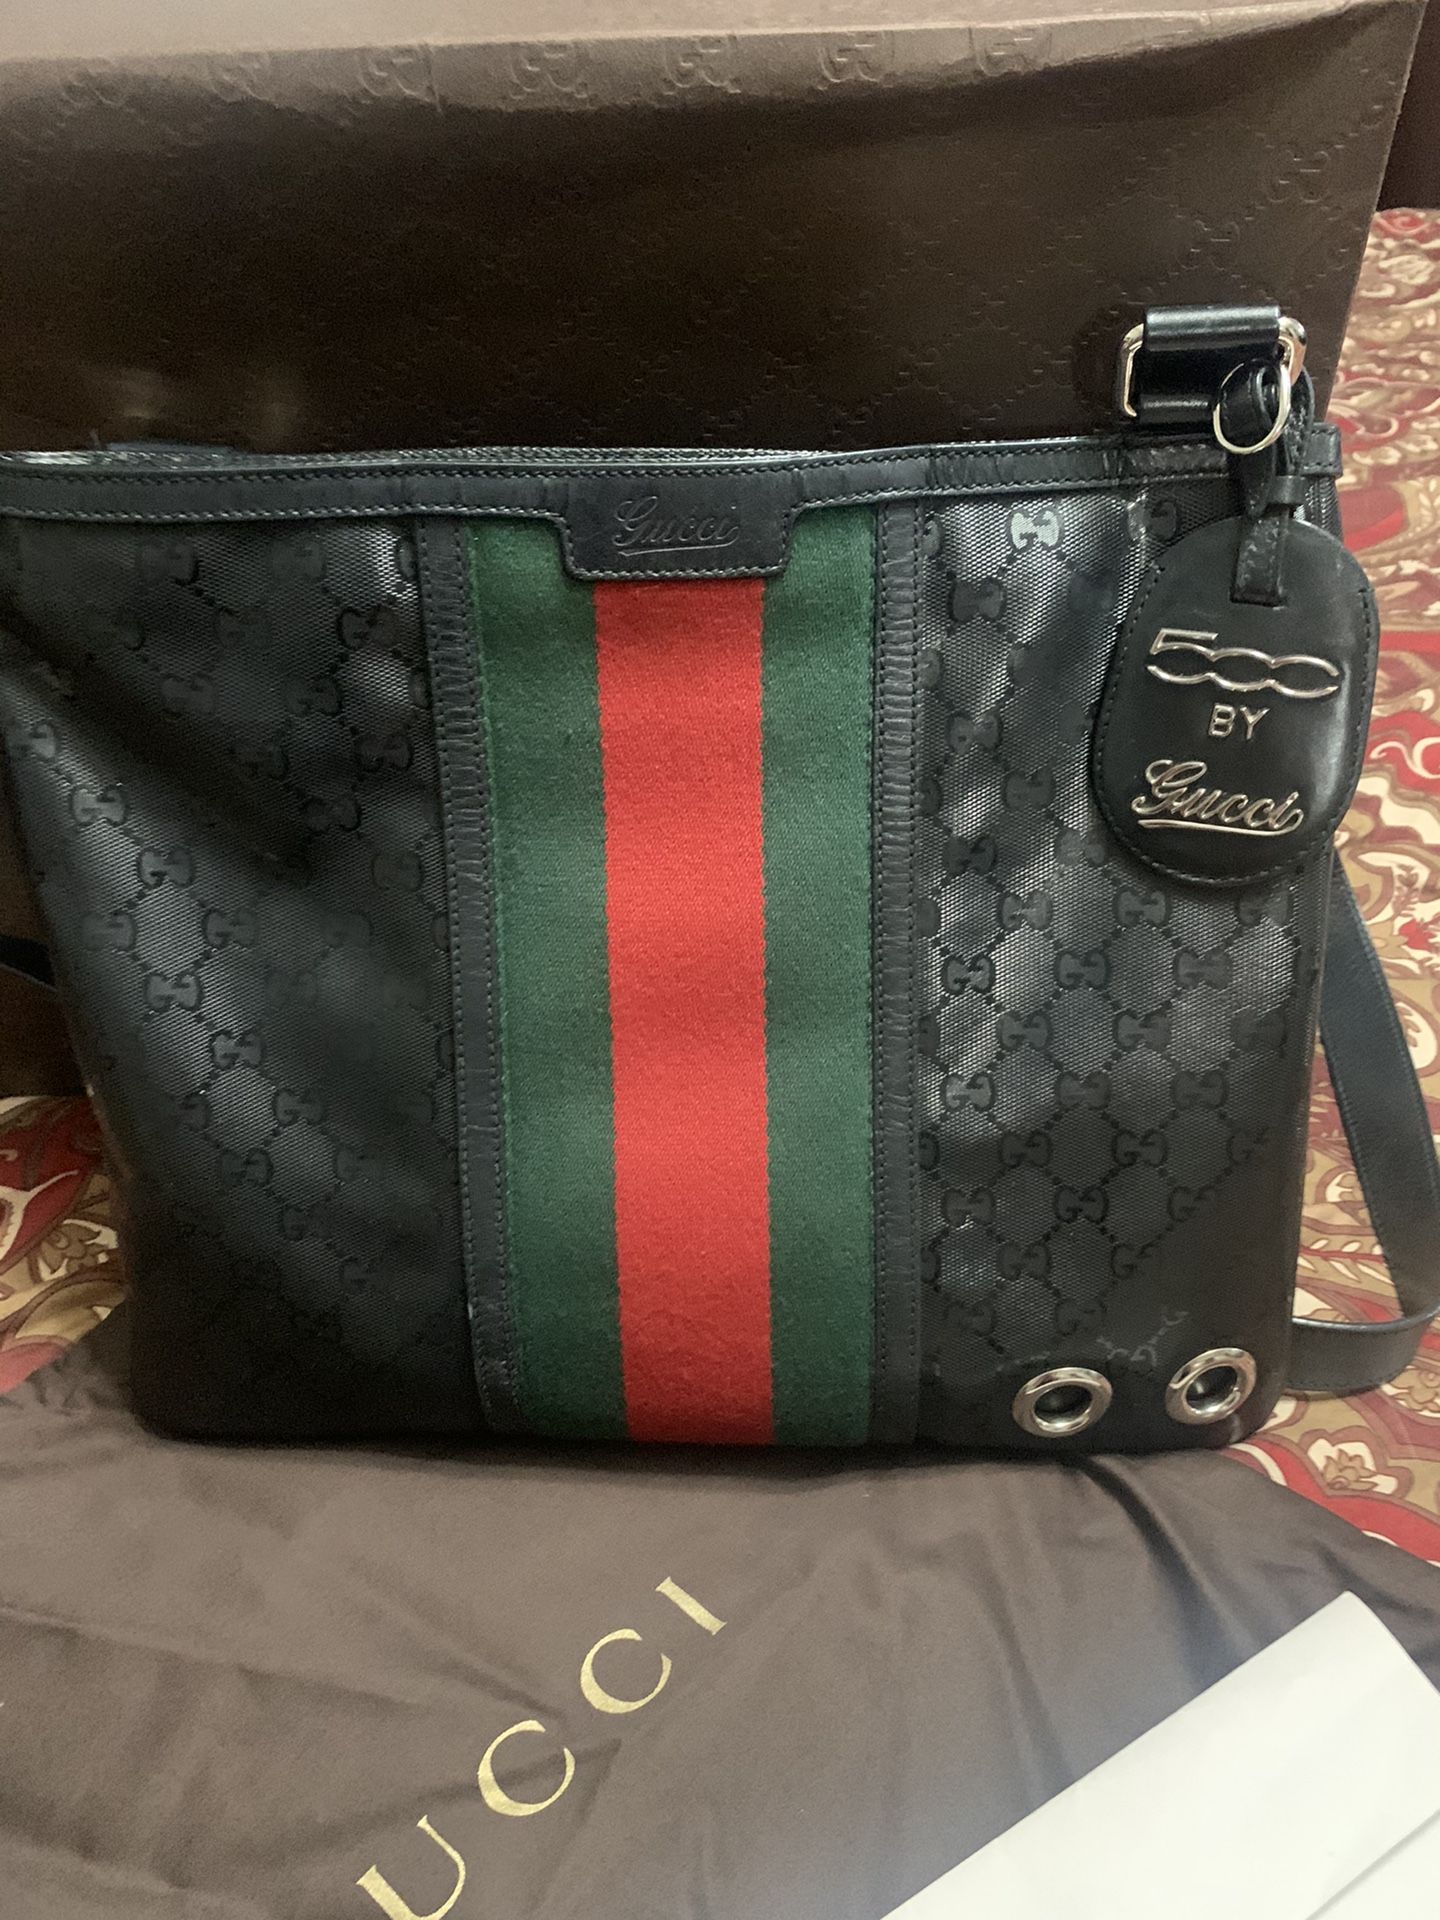 Authentic Gucci crossbody bag! Limited edition 500 by gucci.